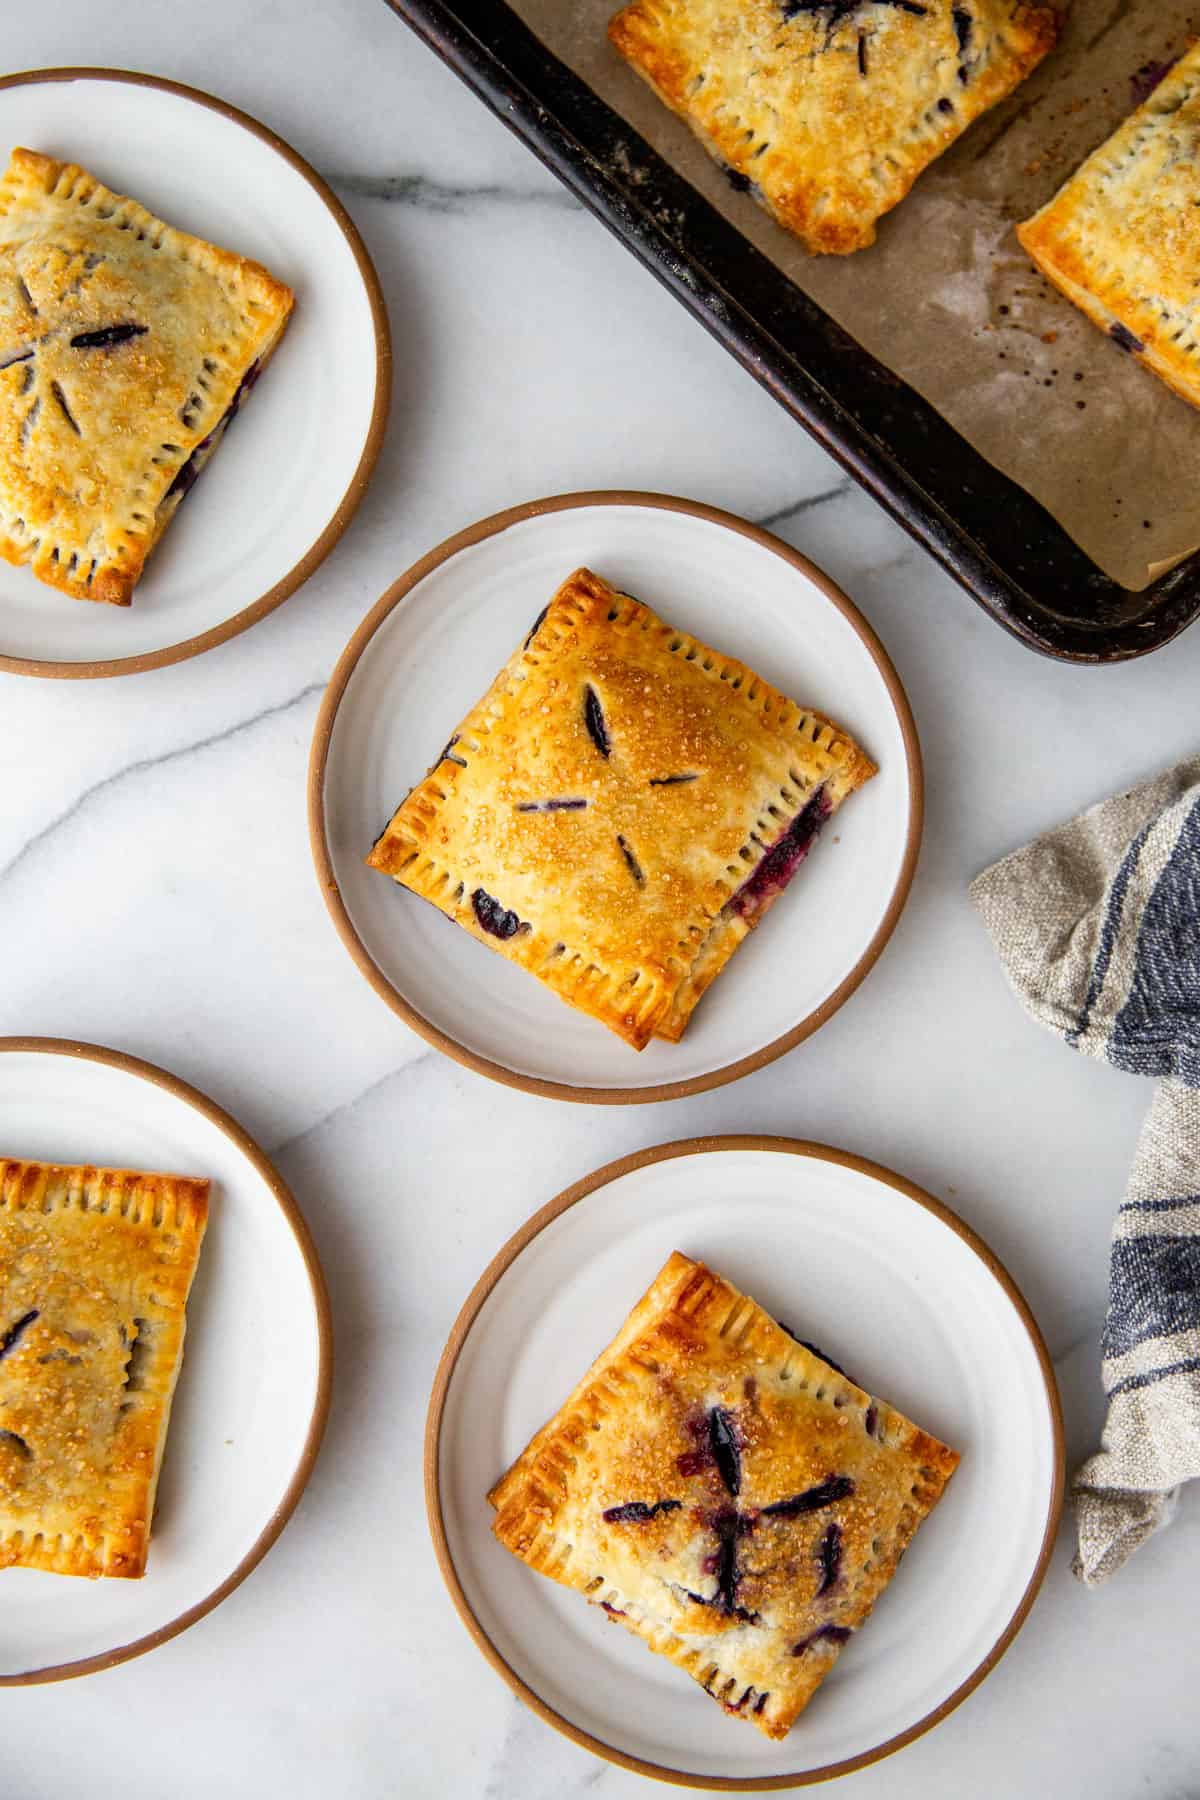 four blueberry hand pies on individual plates